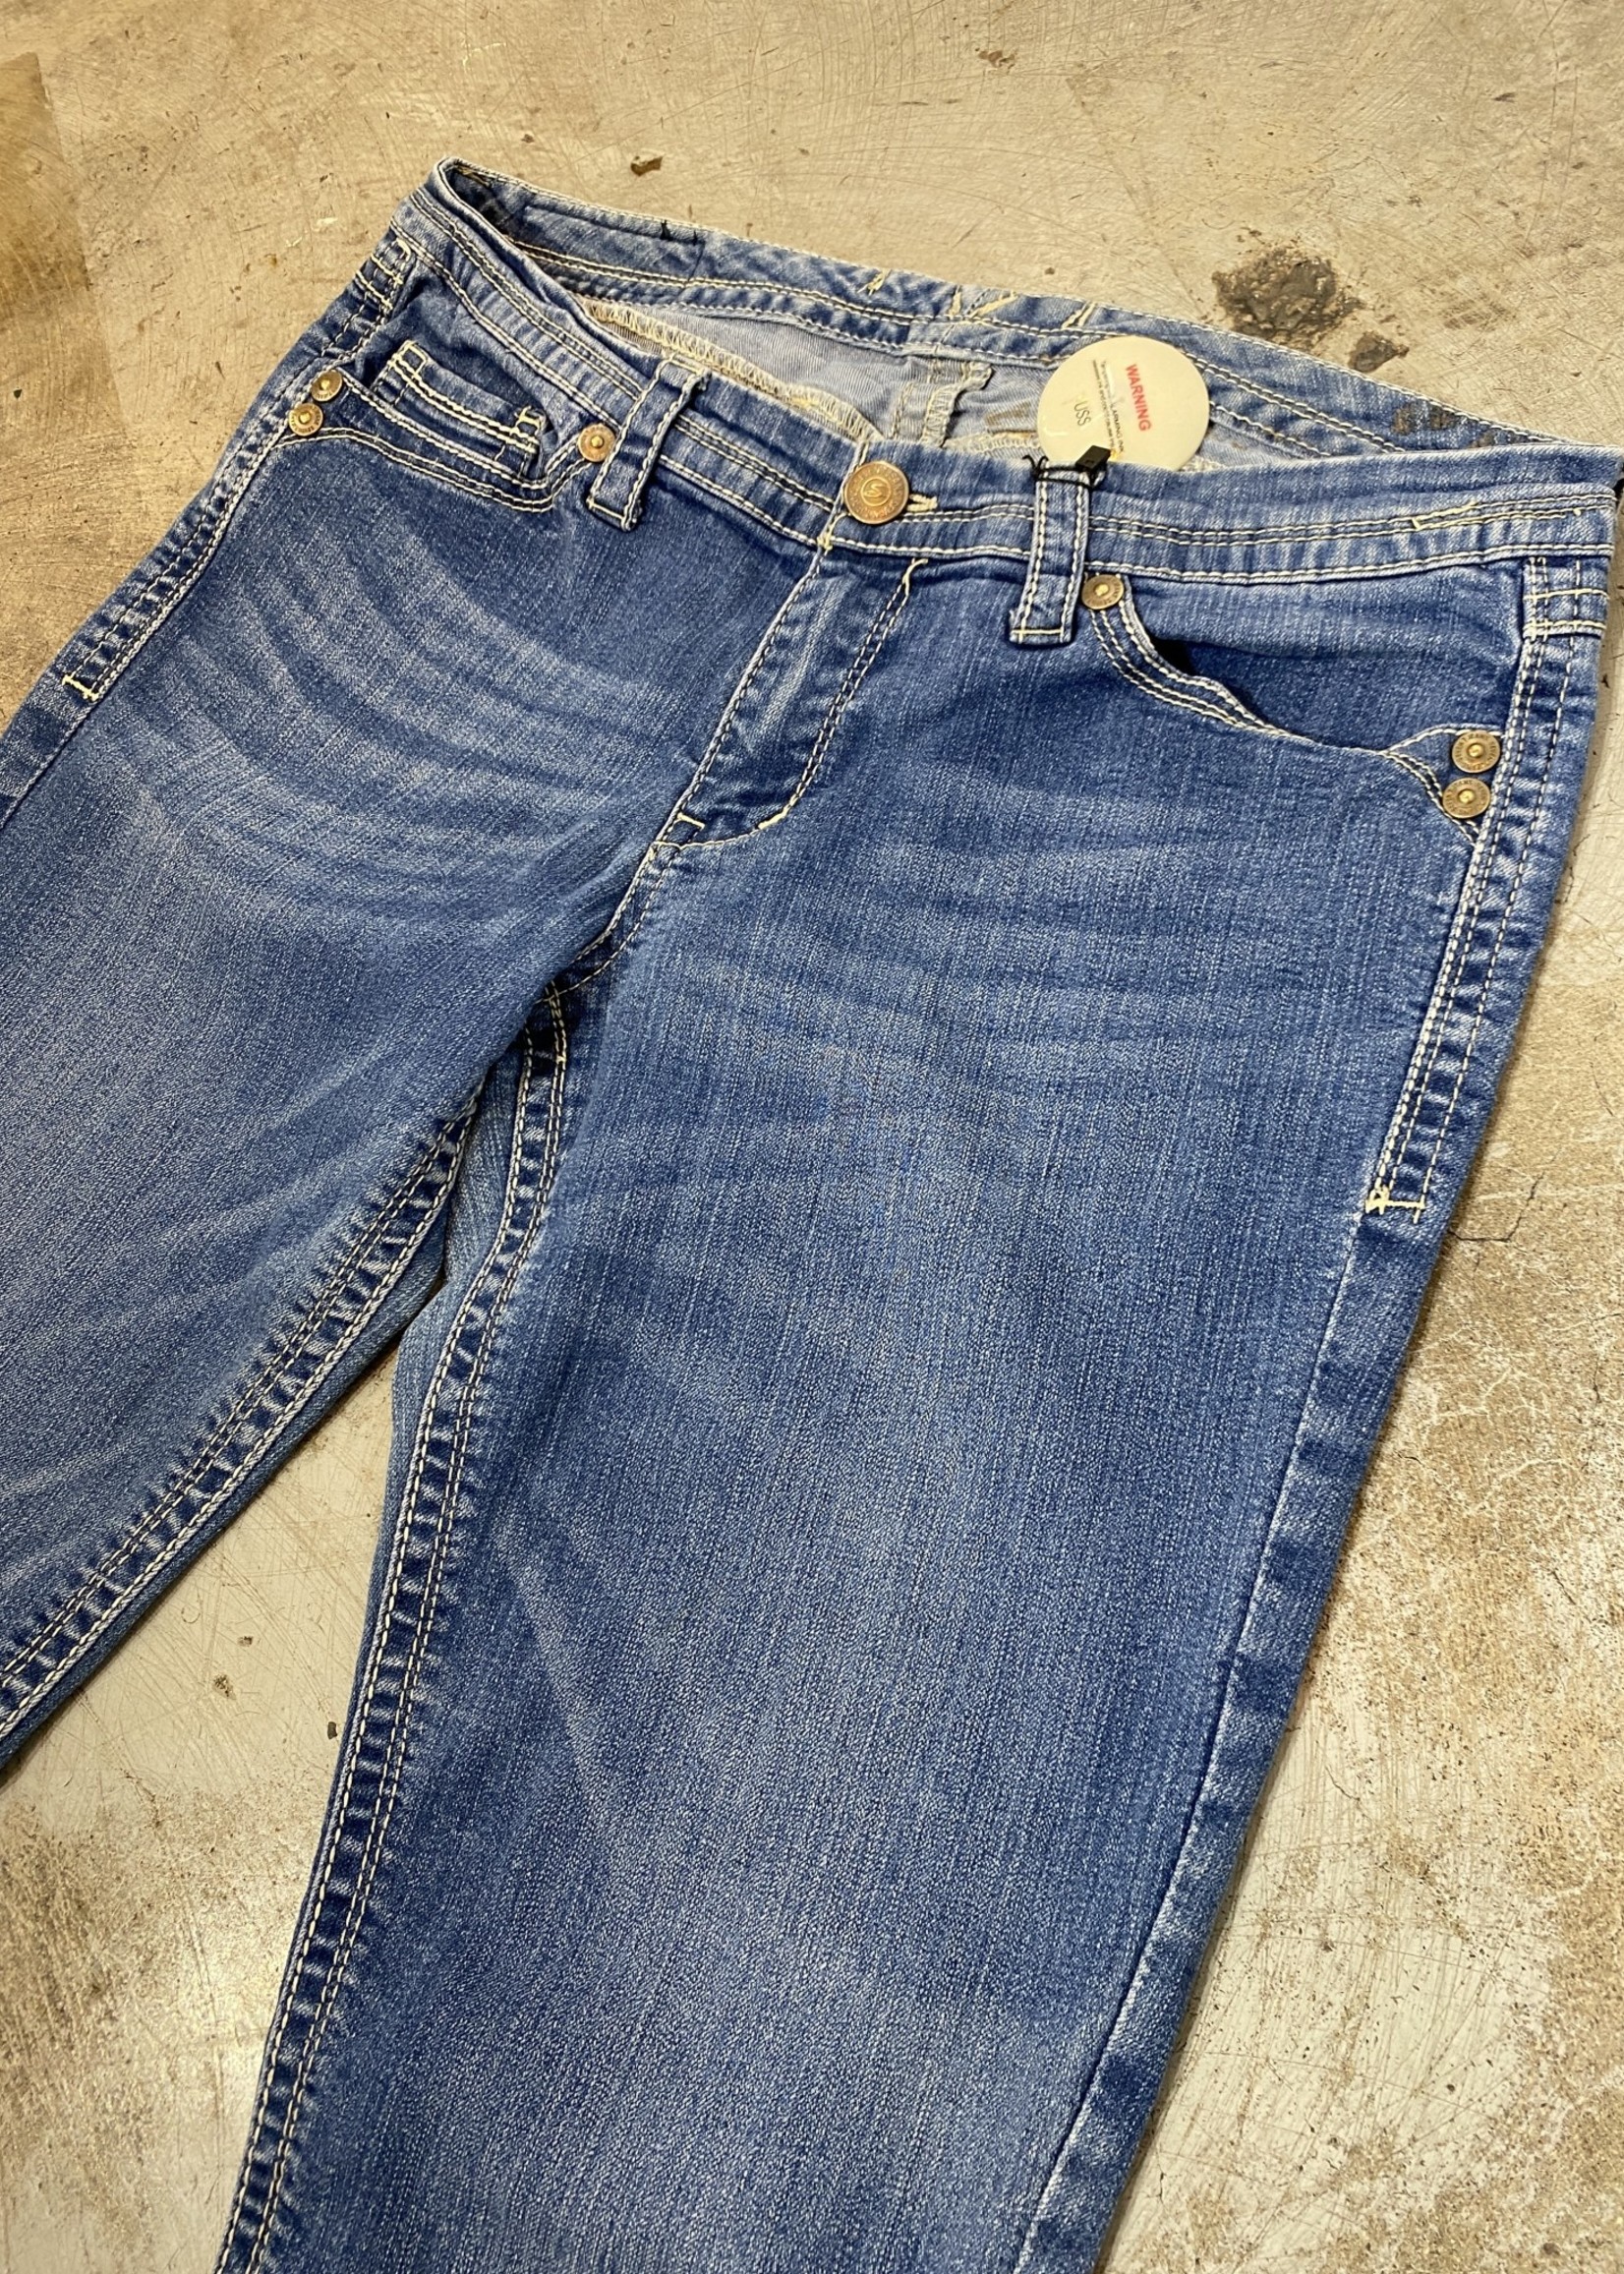 Seven Jeans Mid Wash Flare Jeans 31